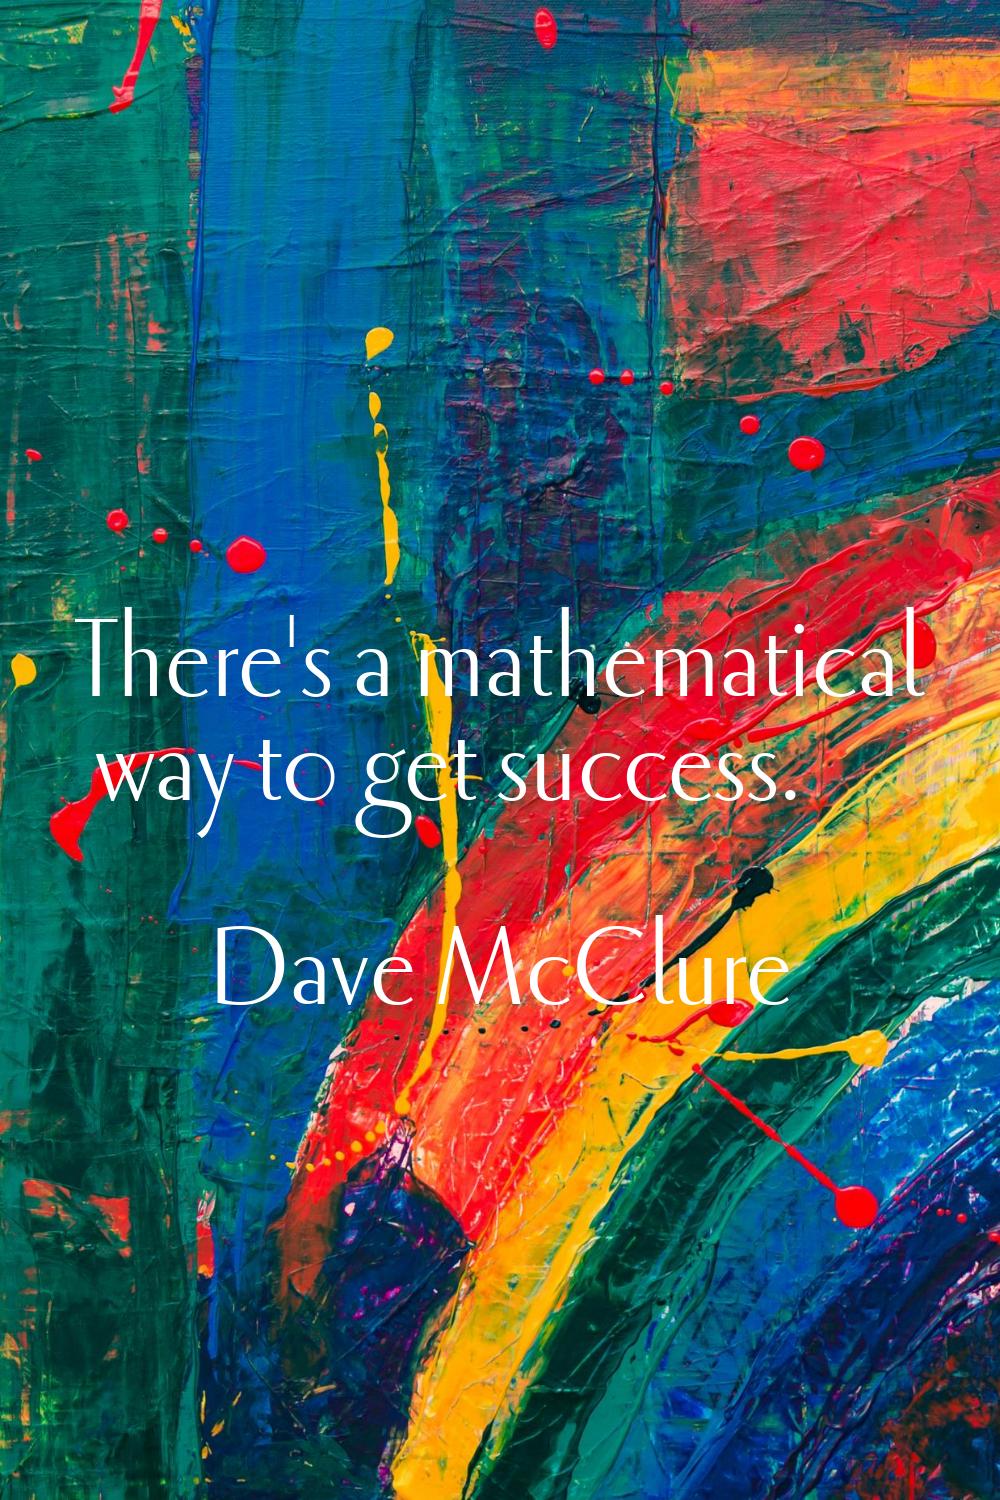 There's a mathematical way to get success.